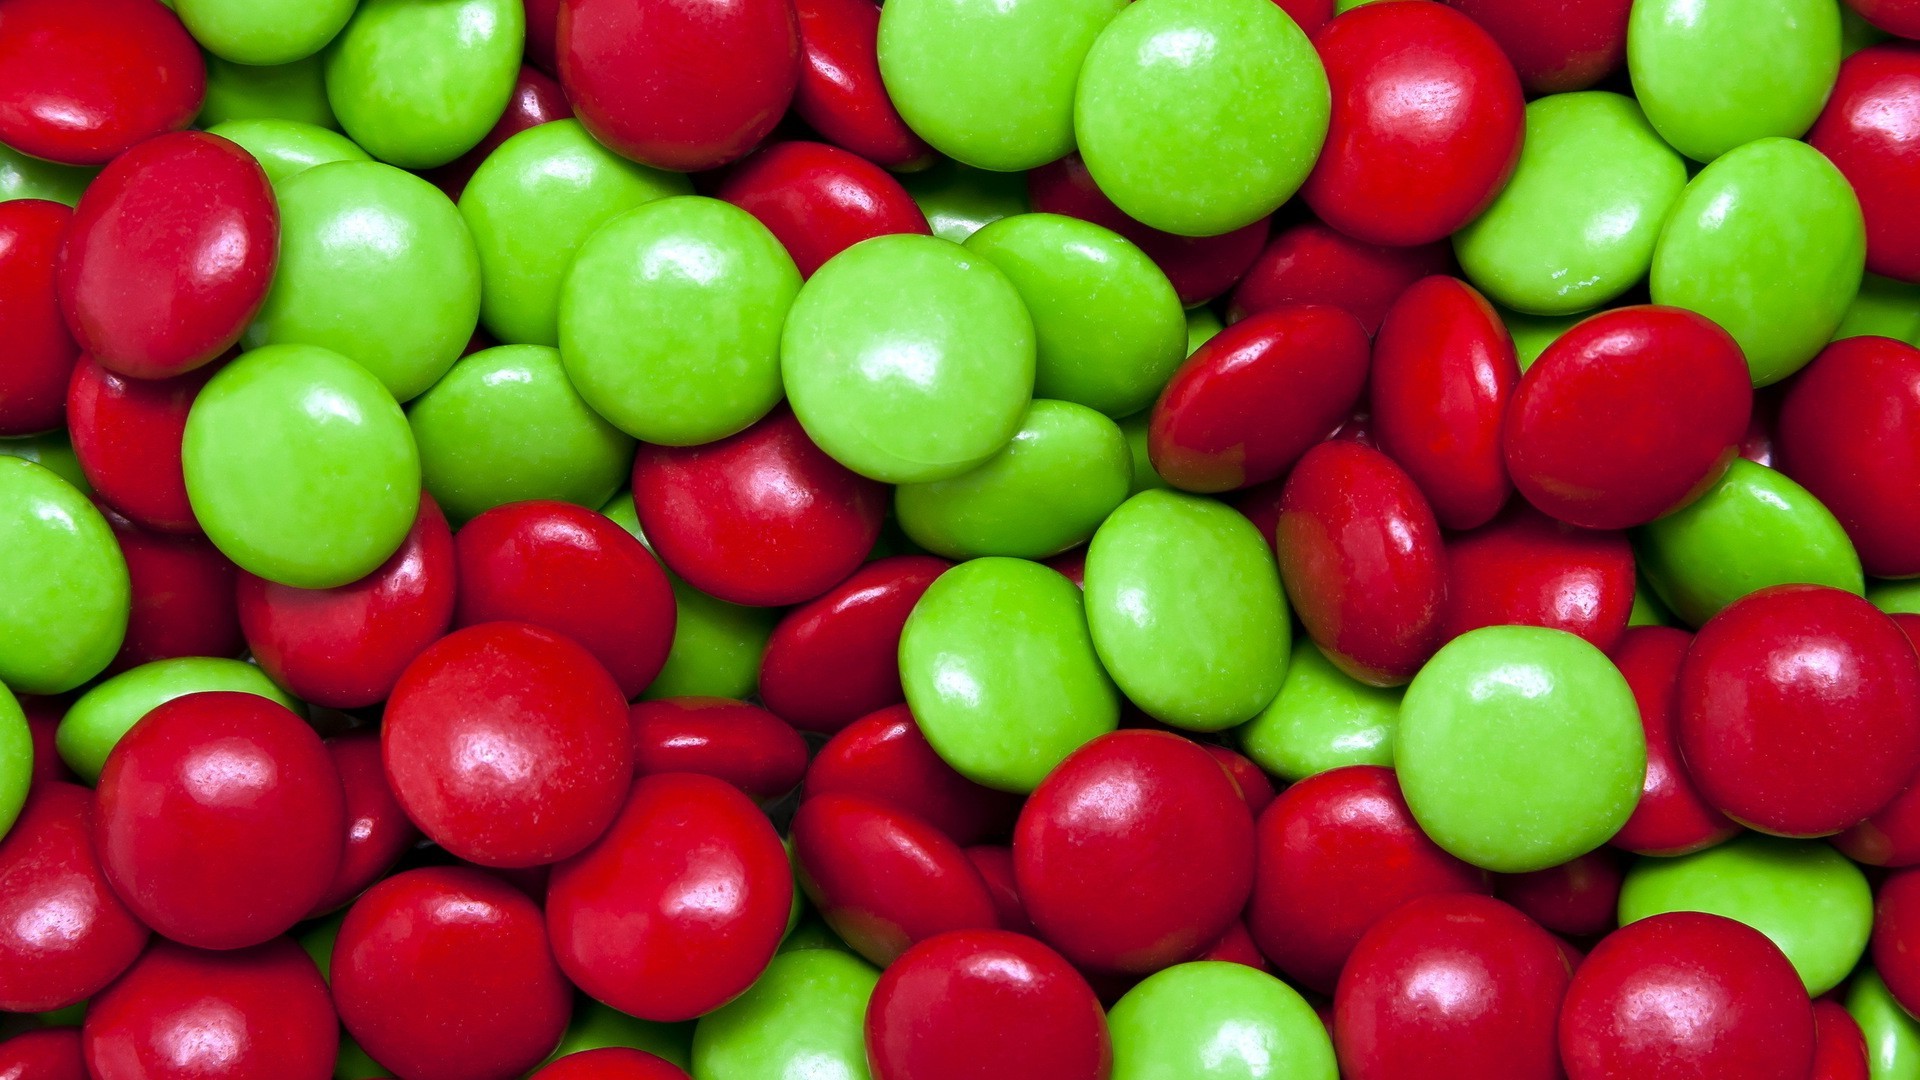 candies, Sweets, Red, Green, Pattern, Reflection Wallpaper